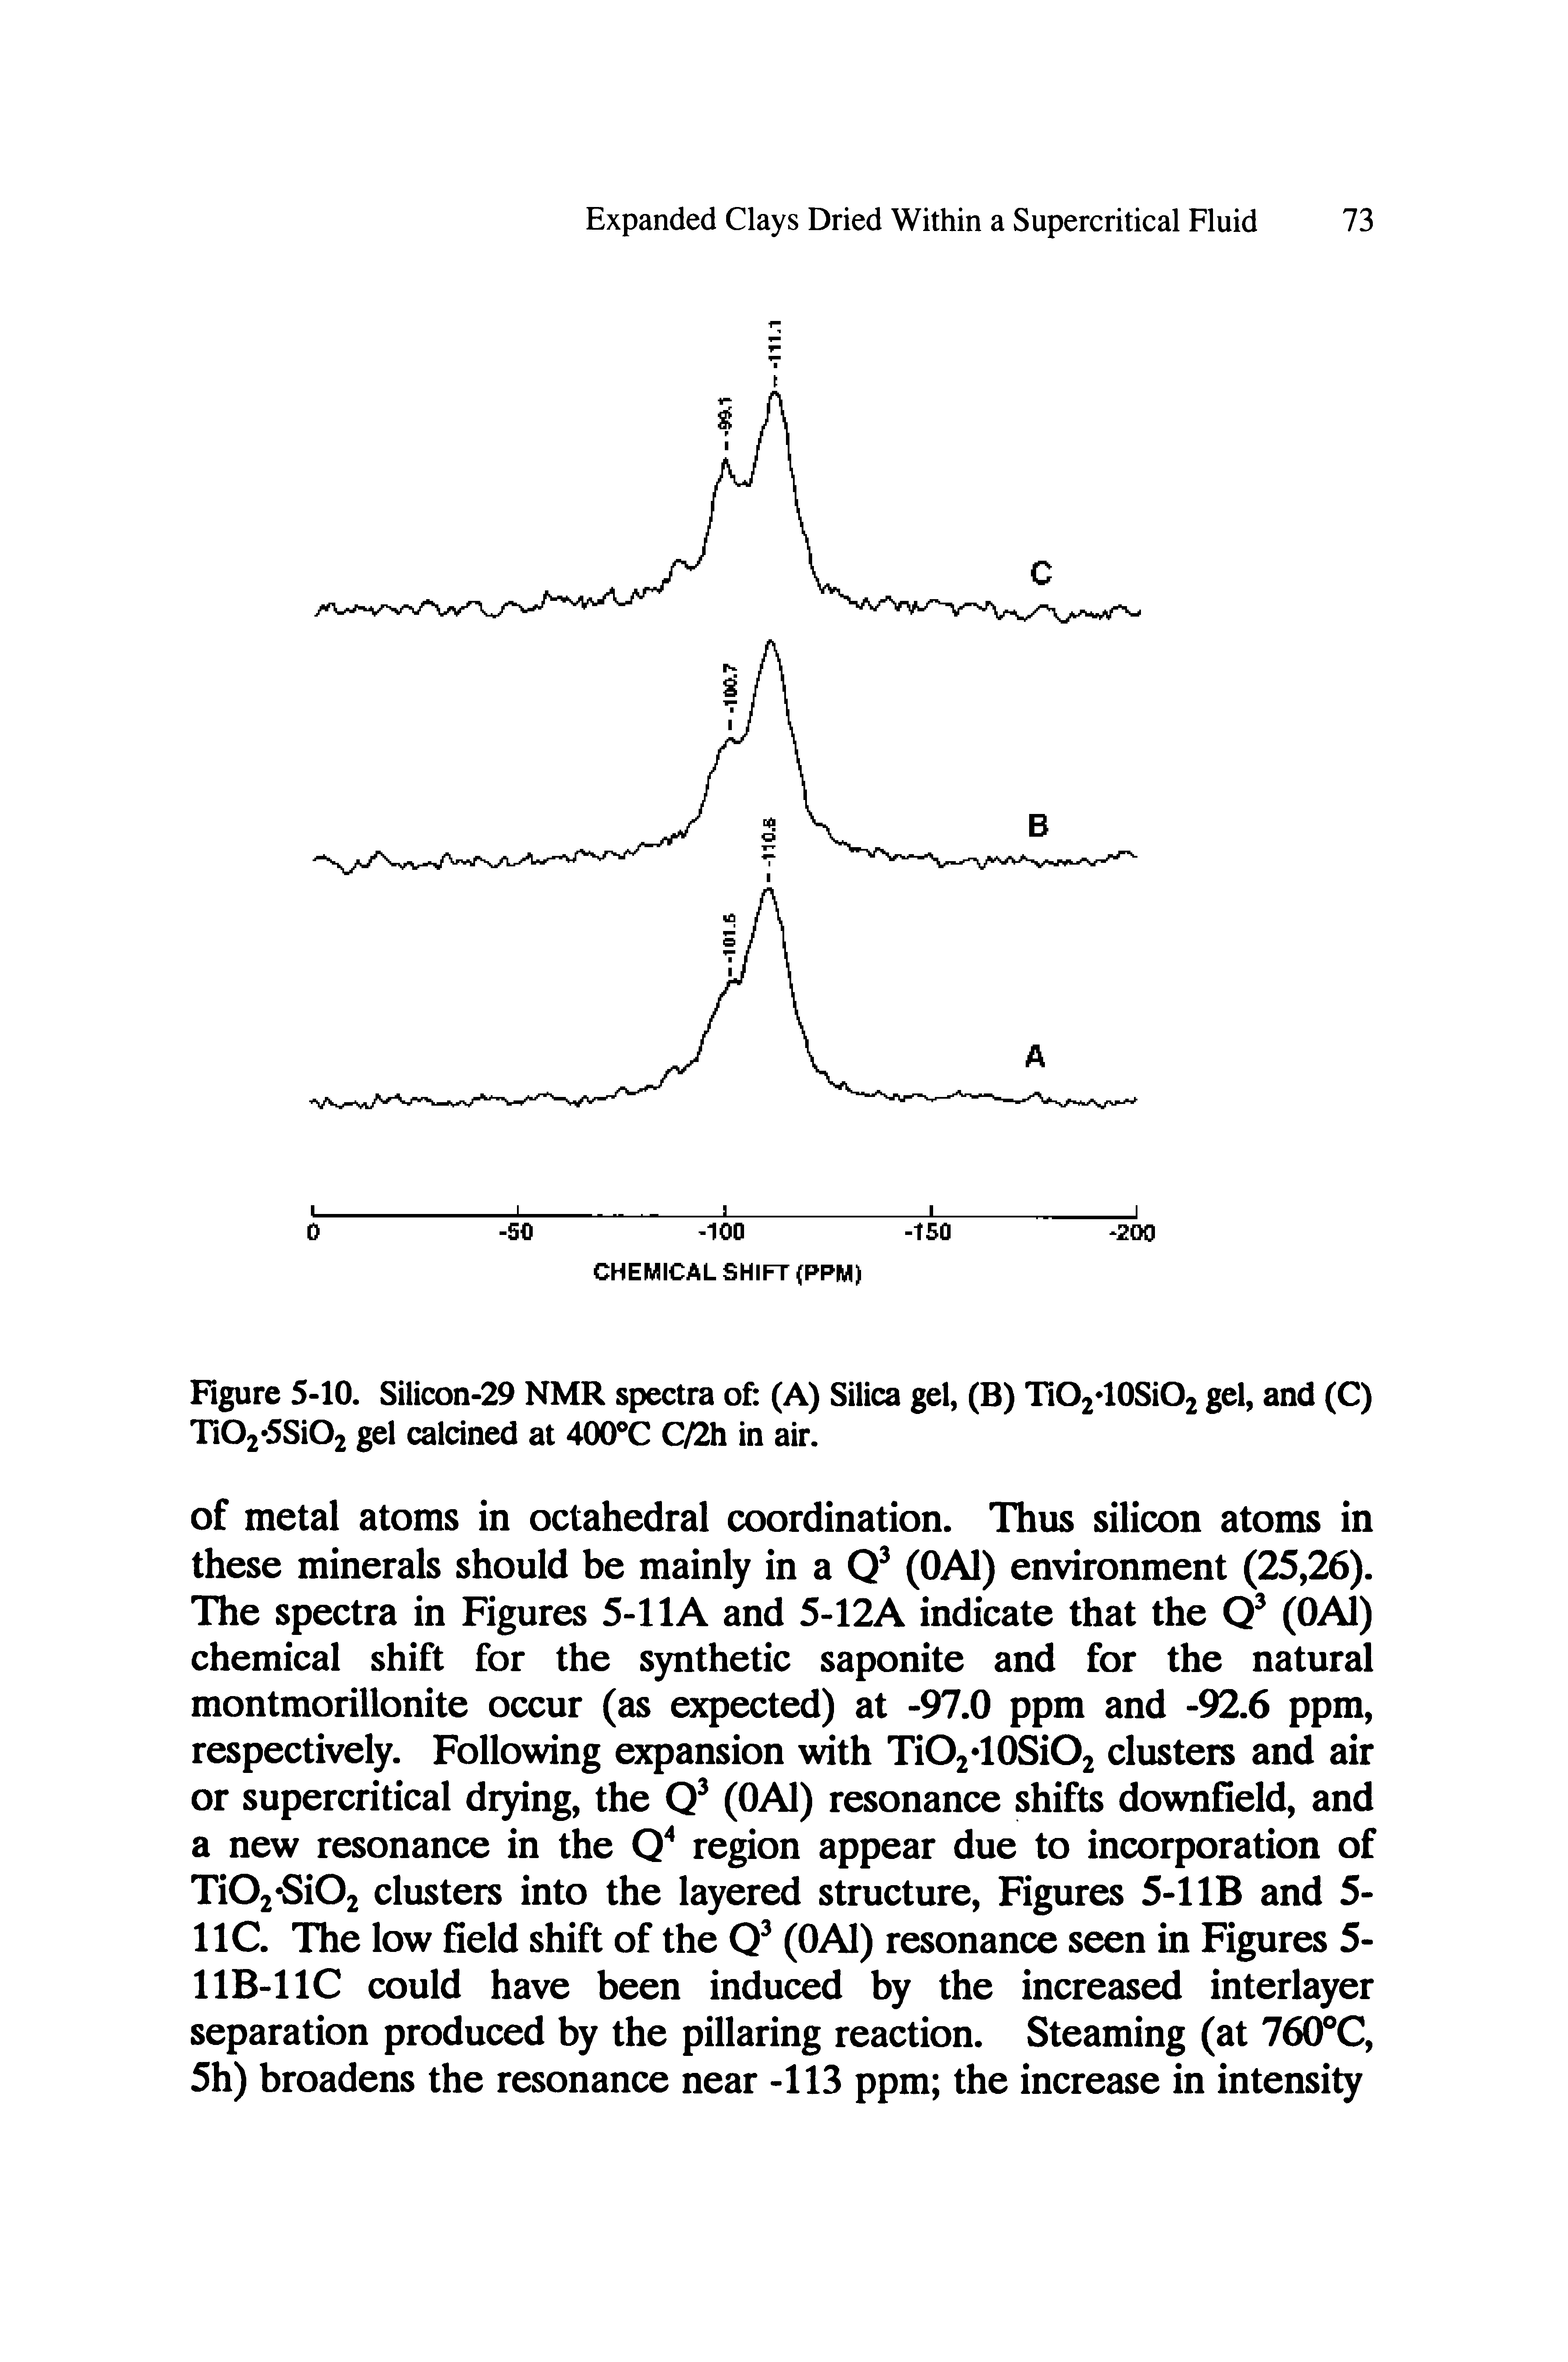 Figure 5-10. Silicon-29 NMR spectra of (A) Silica gel, (B) TiO2 10SiO2 gel, and (C) Ti02 5Si02 gel calcined at 400 C C/2h in air.